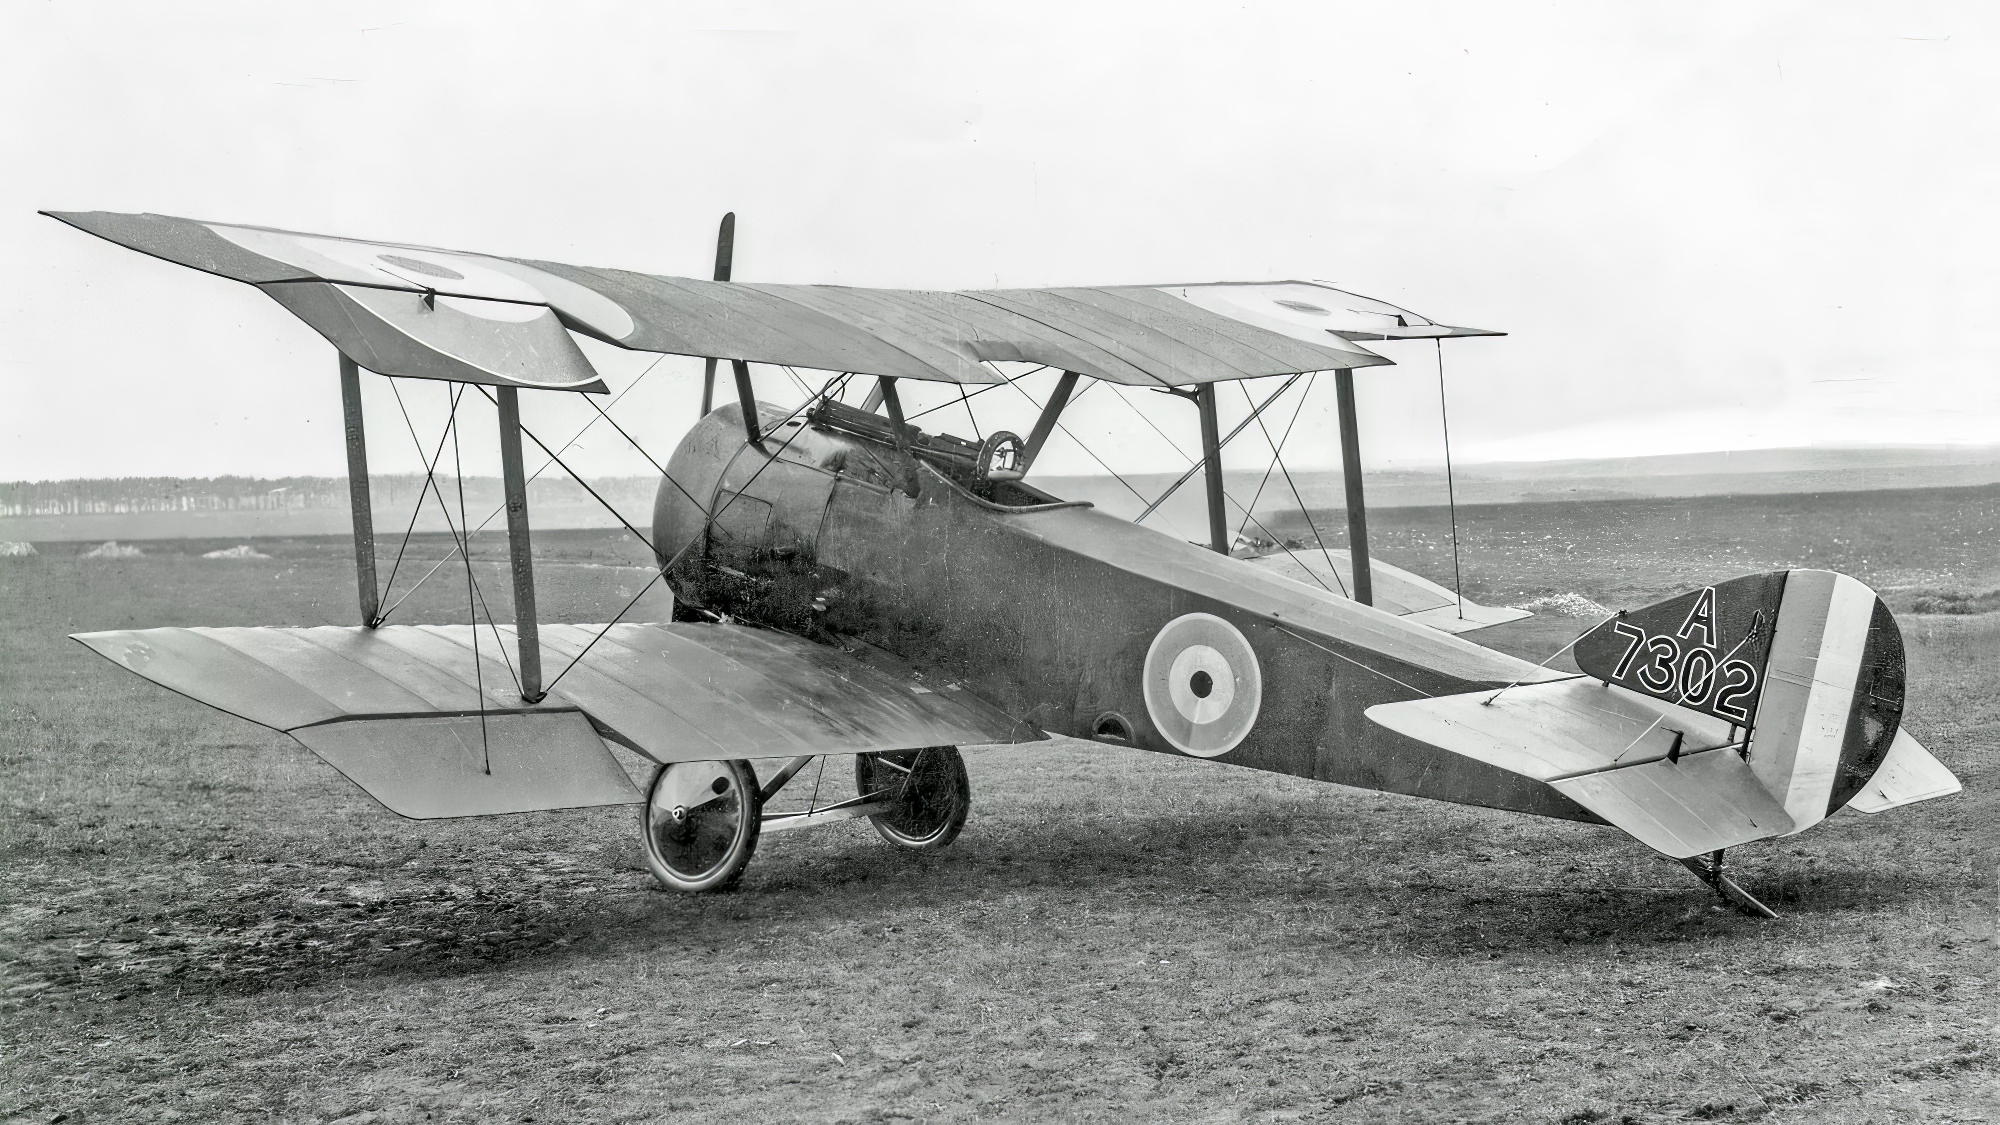 A7302 was the second production Sopwith Pup for the RFC, built by the Standard Motor Co